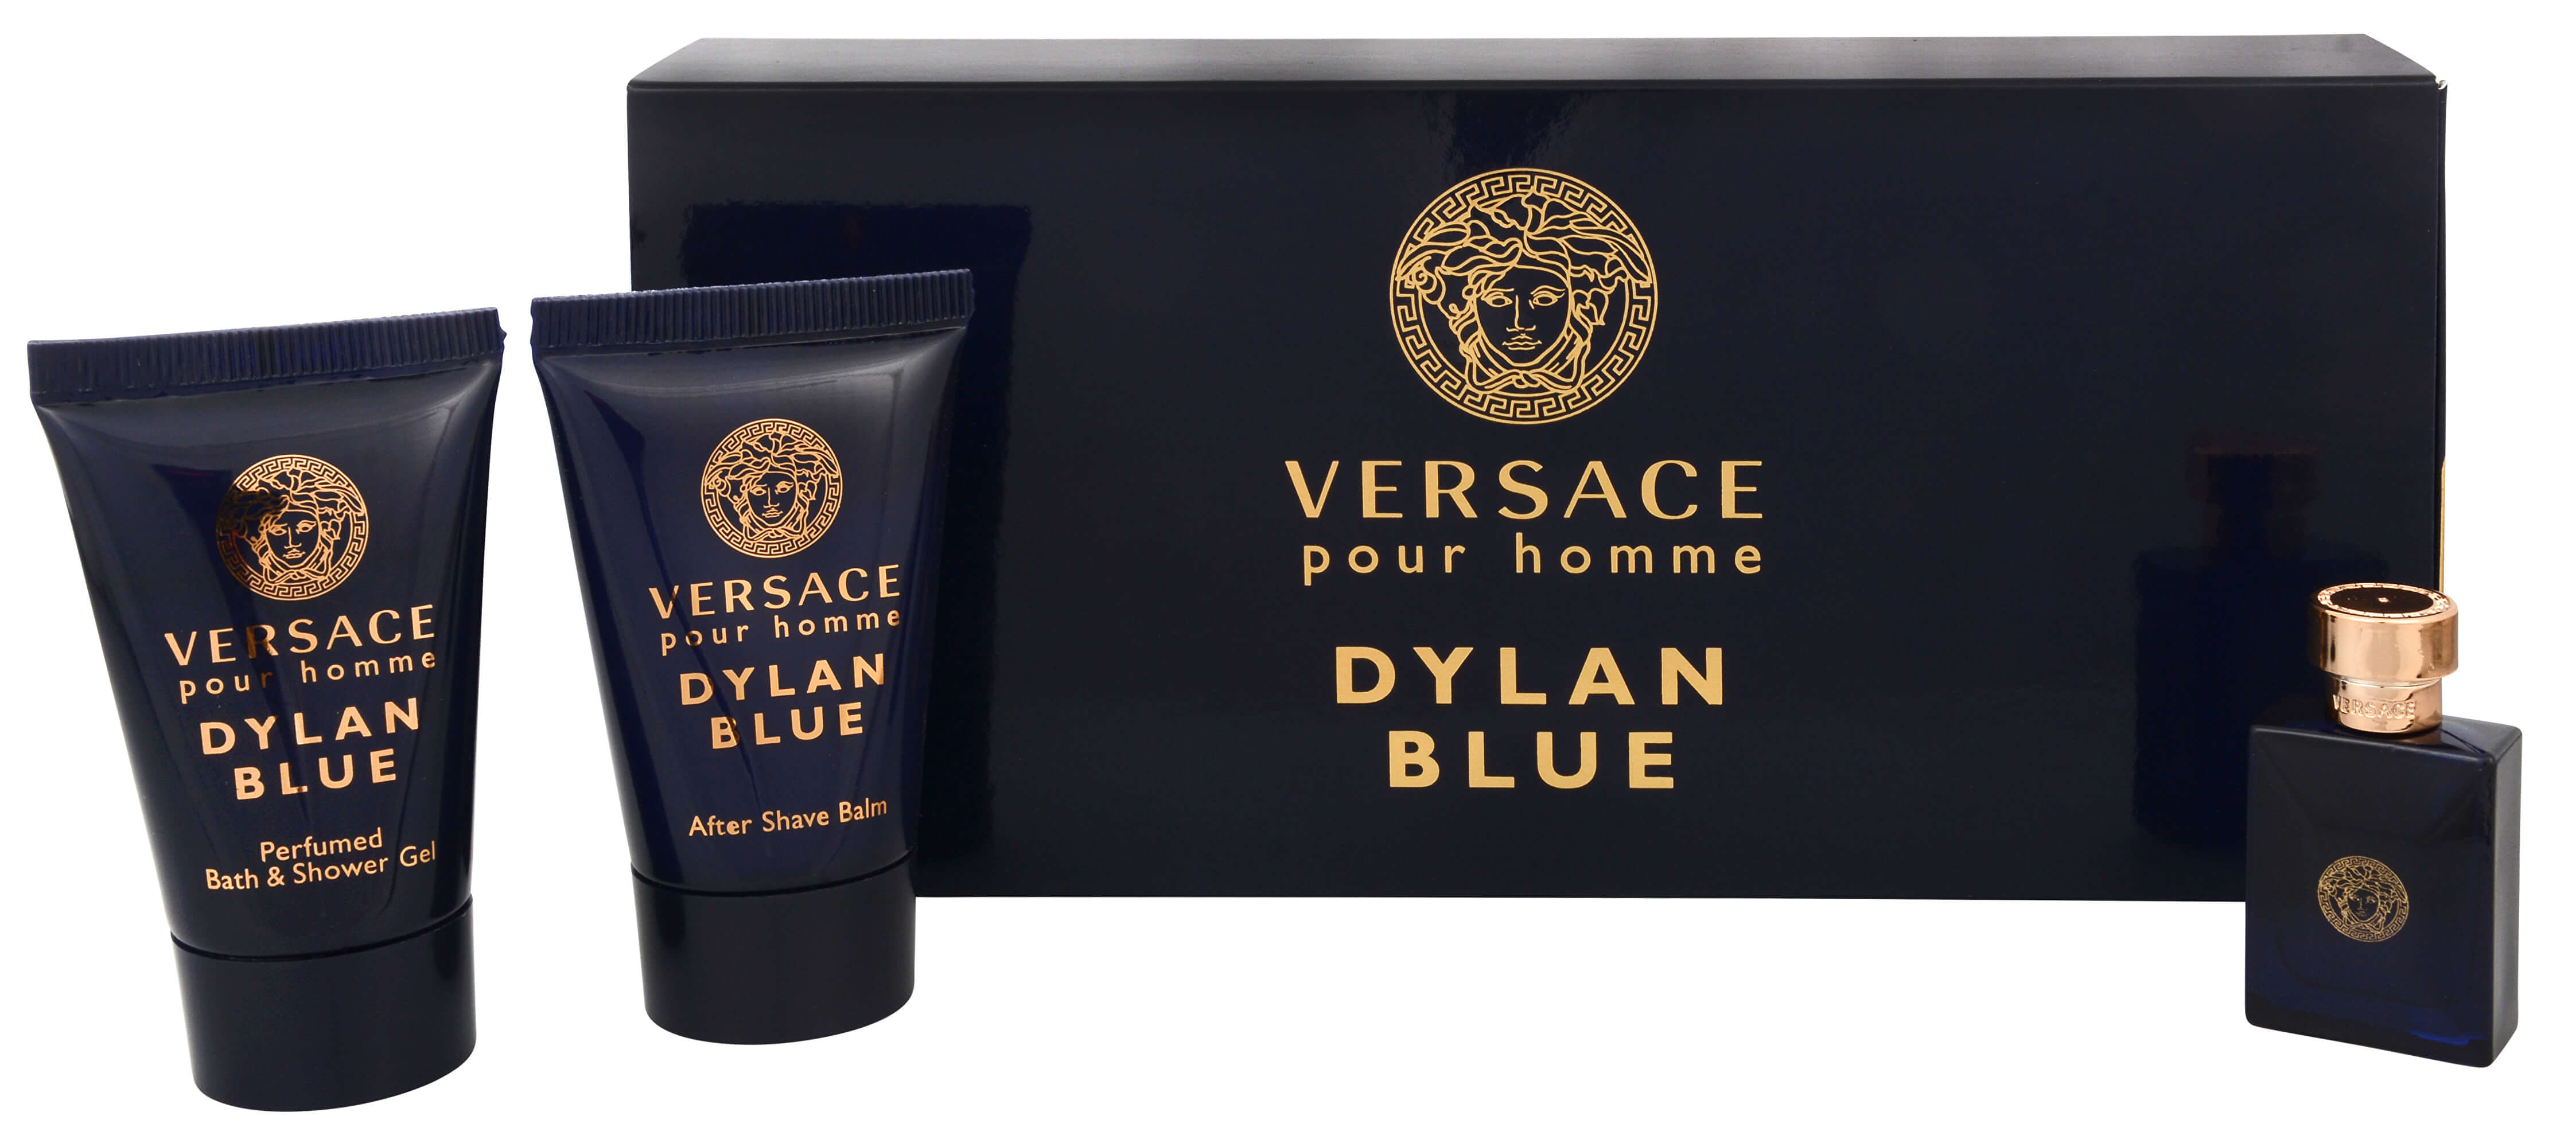 Versace Versace Pour Homme Dylan Blue - EDT 5 ml + tusfürdő 25 ml + after shave balzsam 25 ml